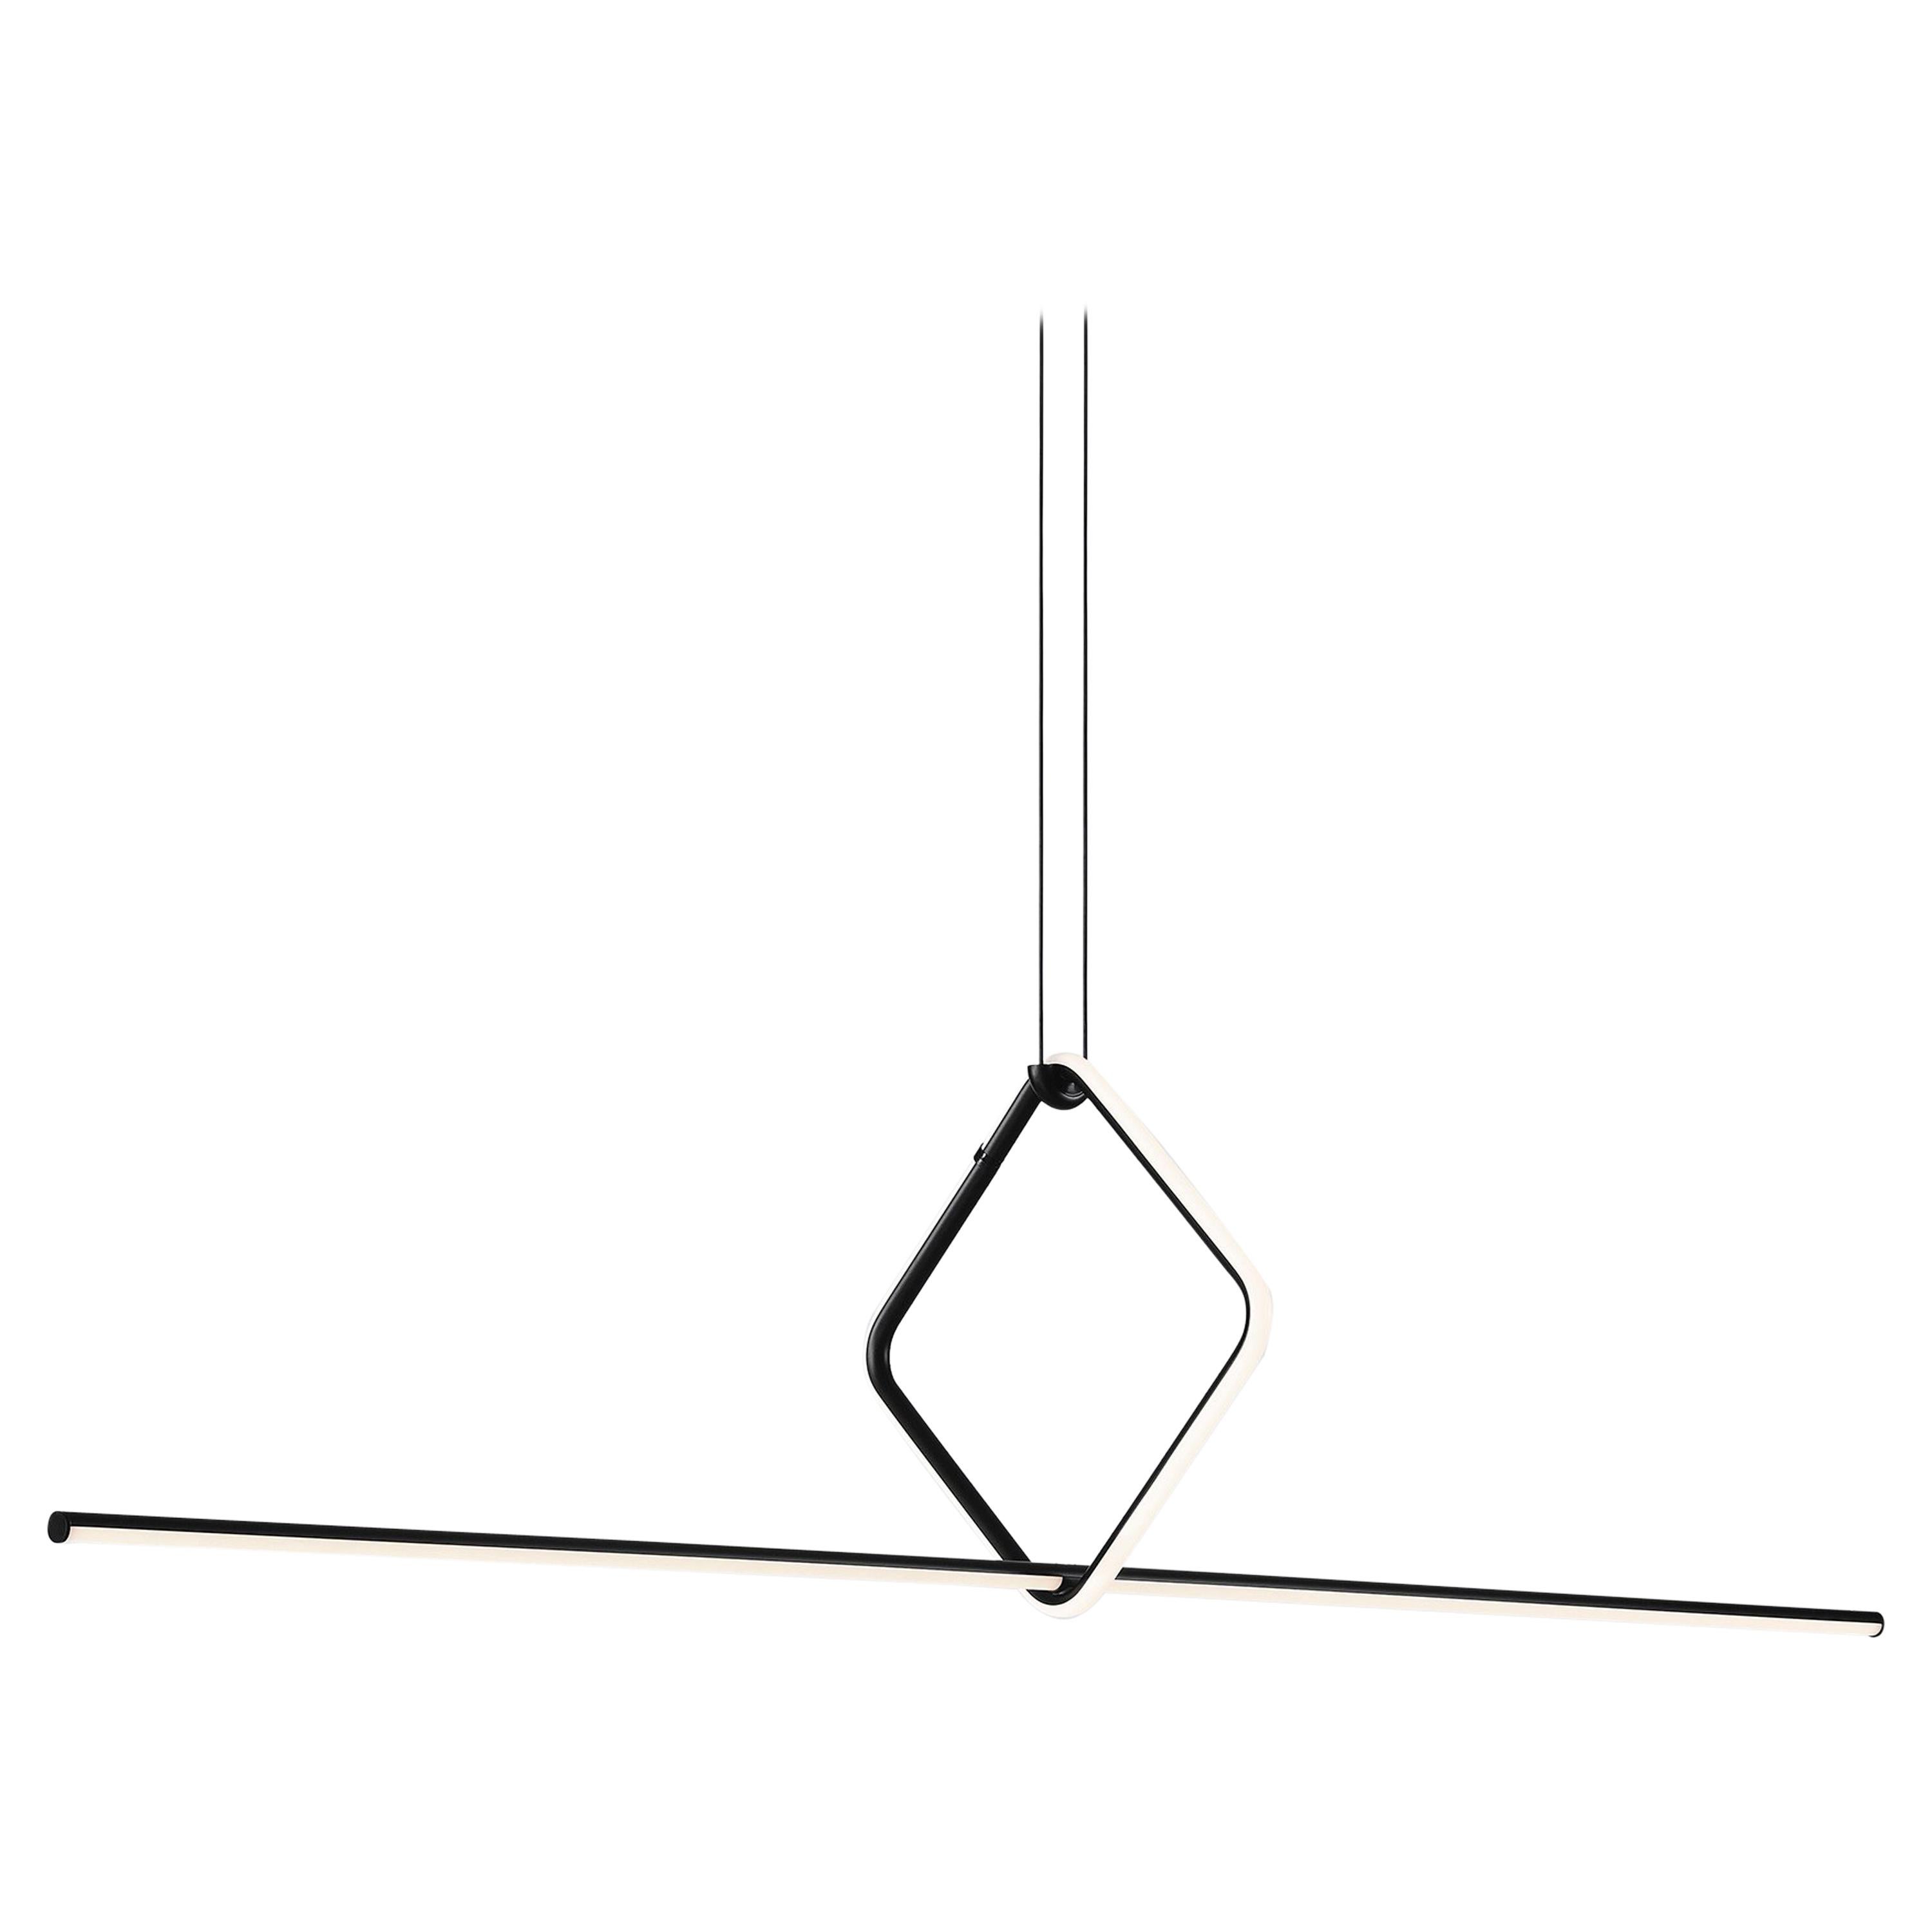 FLOS Small Square and Line Arrangements Light by Michael Anastassiades